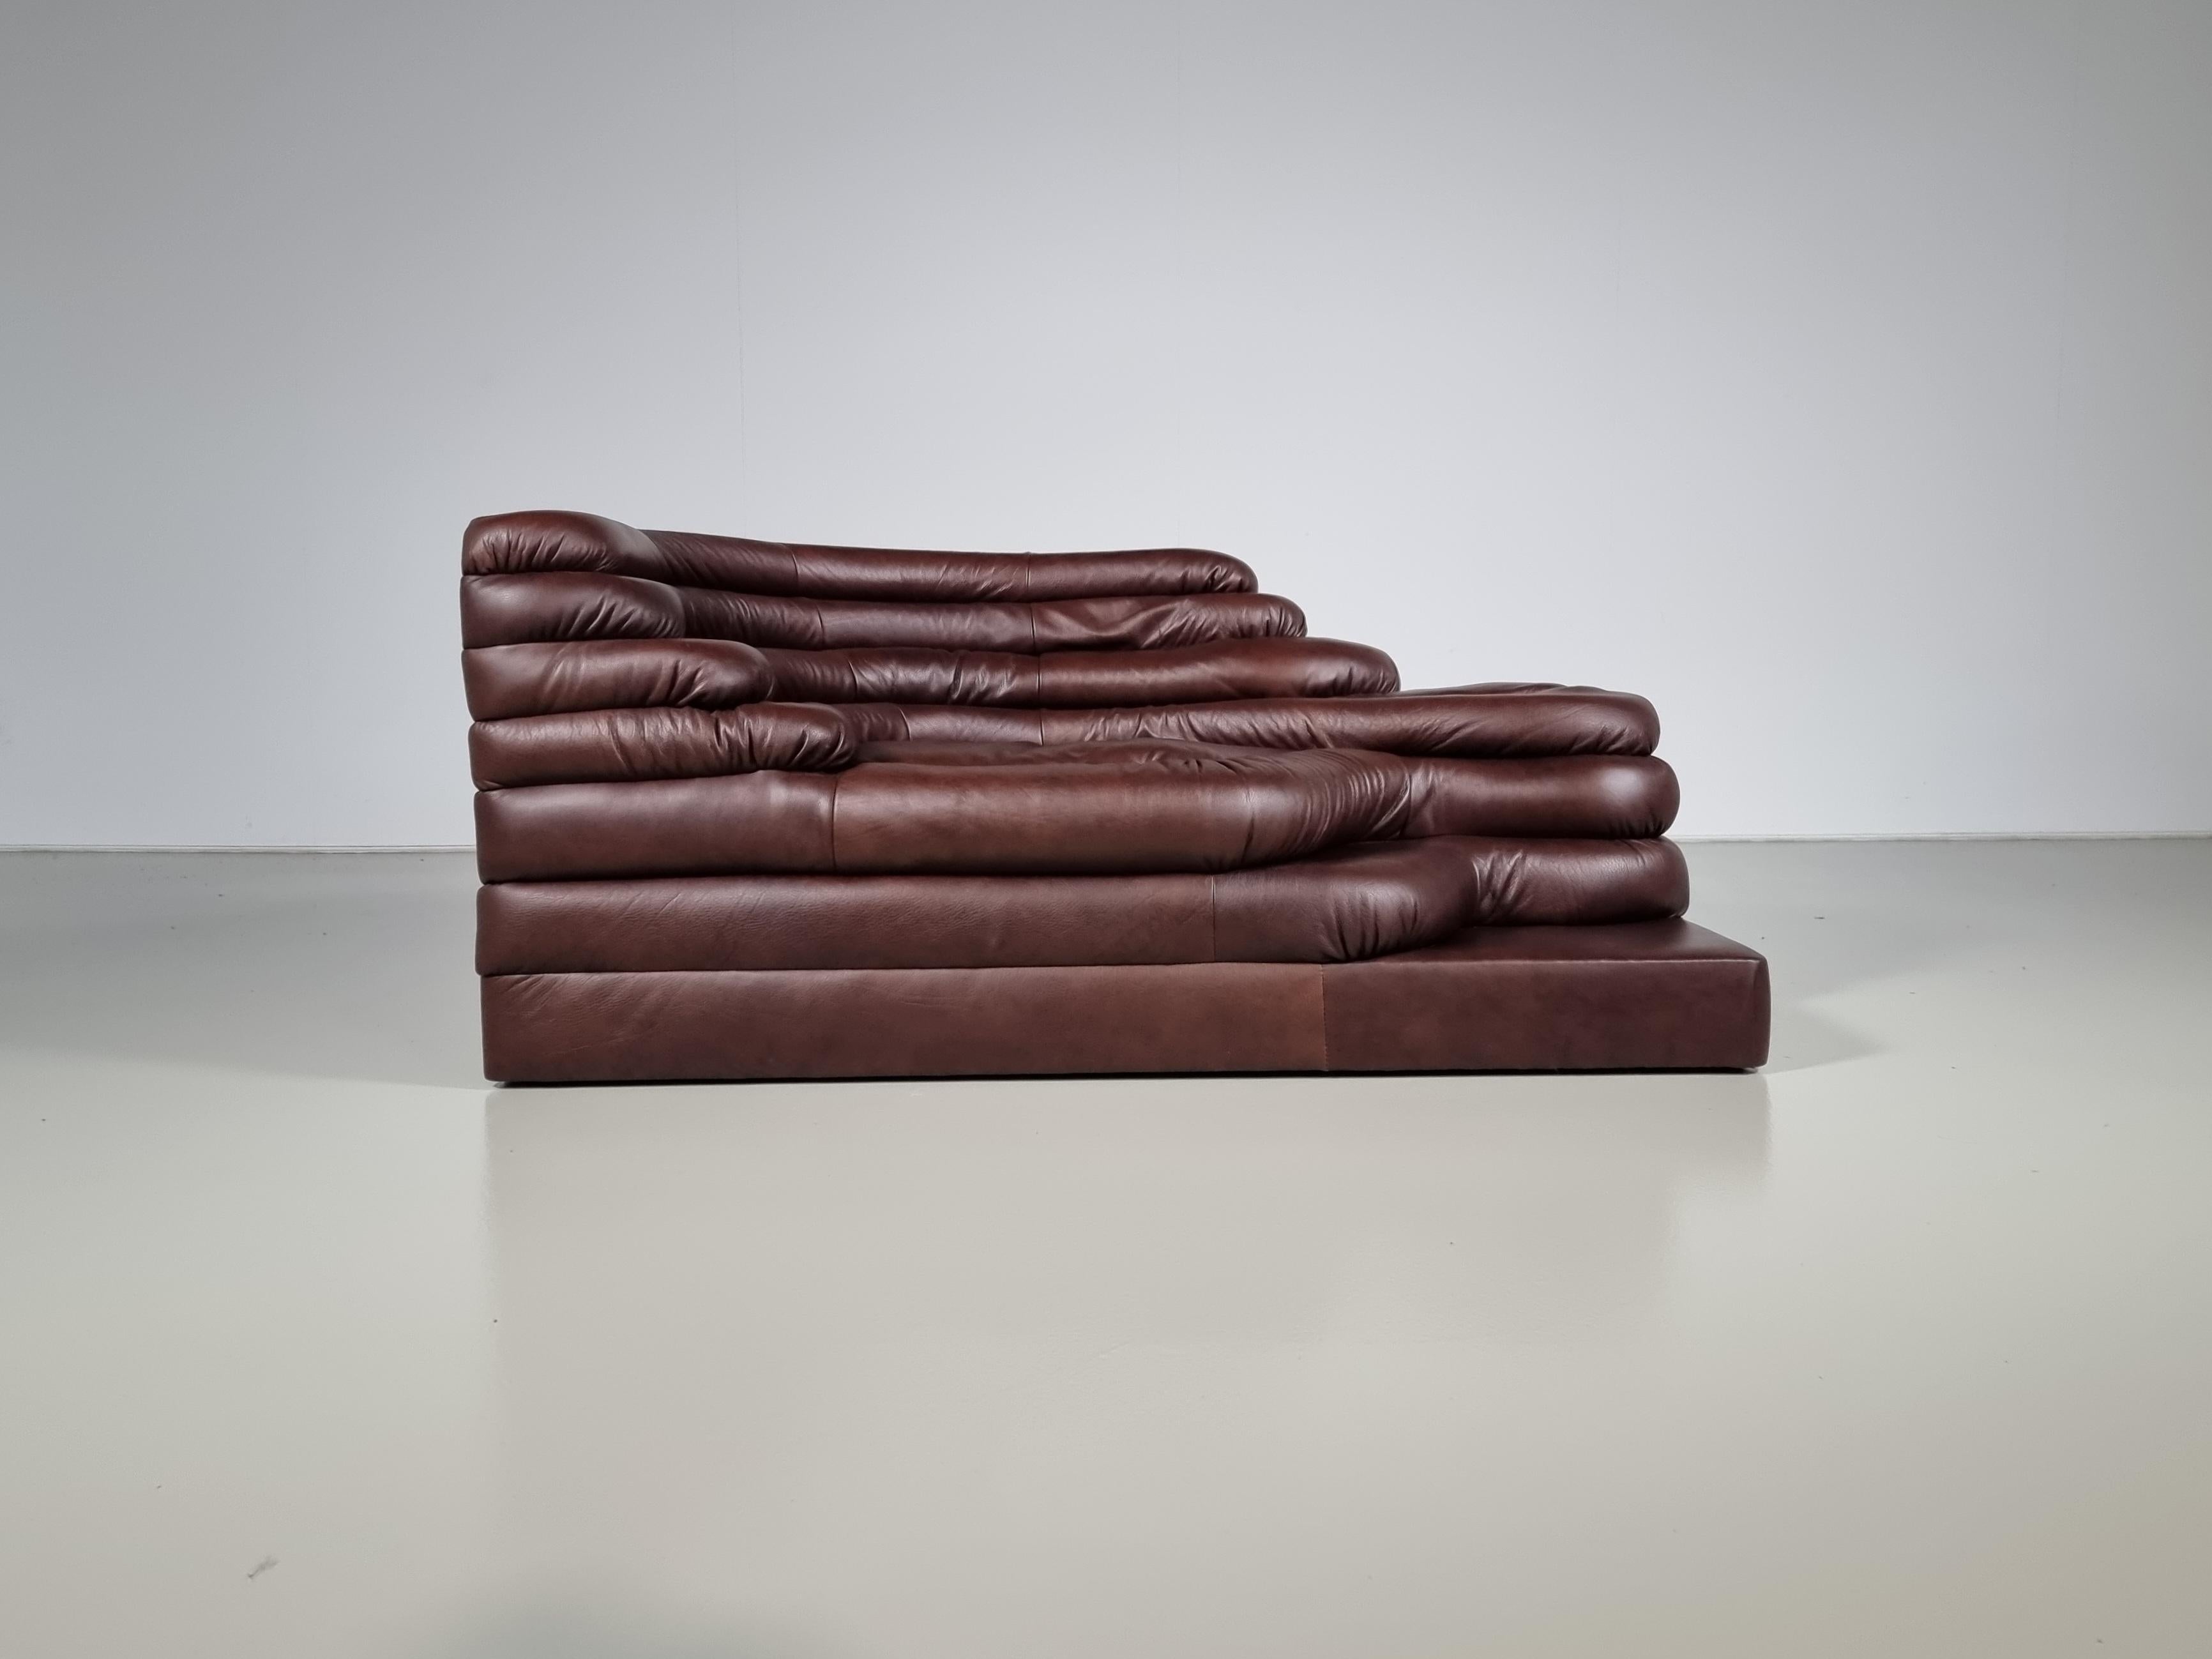 DS-1025 Terrazza Landscape sofa in the original brown leather. Designed by Ubald Klug for De Sede. The design of this sofa was inspired by waves, waterfalls, and rock formations which are clearly visible in the layering of the sofa. Very comfortable